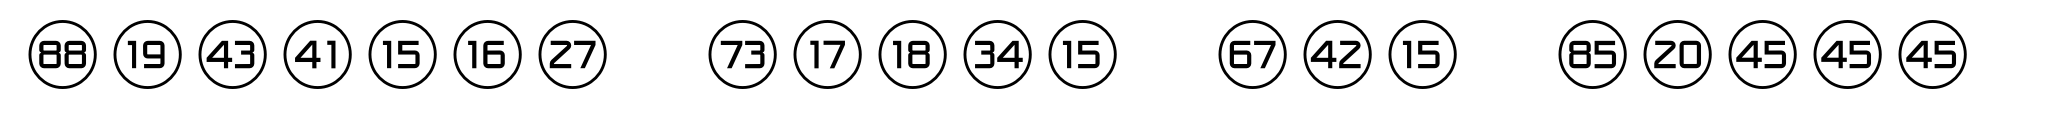 Numbers Style One Circle Positive image